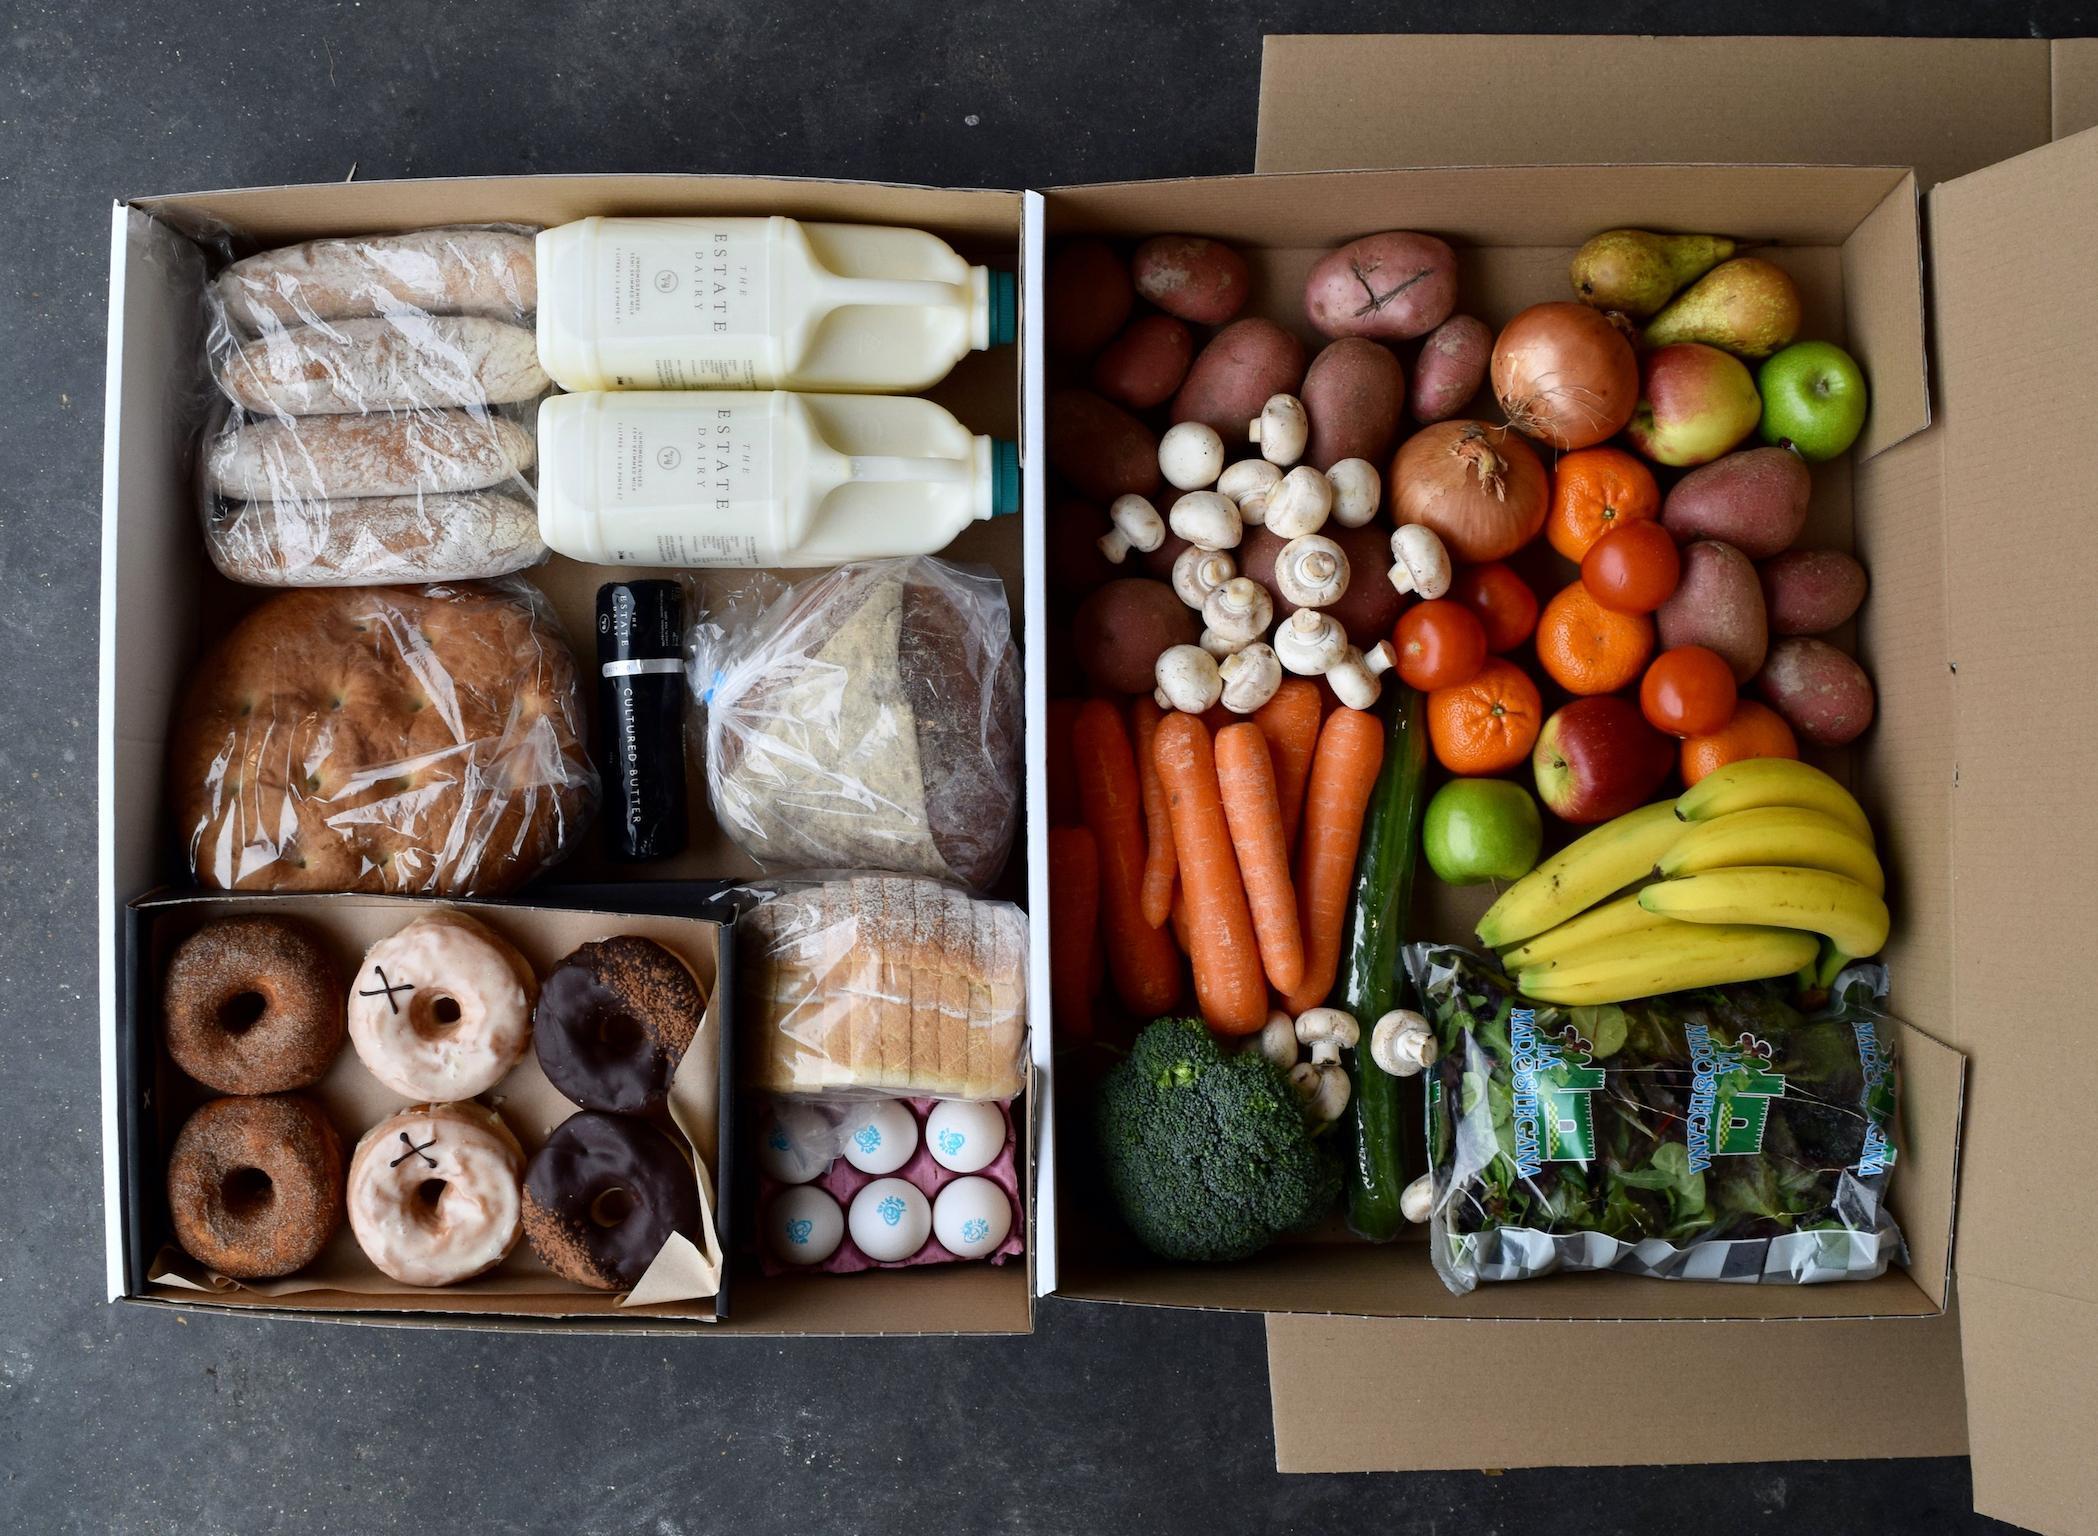 Crosstown Doughnuts has joined with other independent retailers to create its own food box